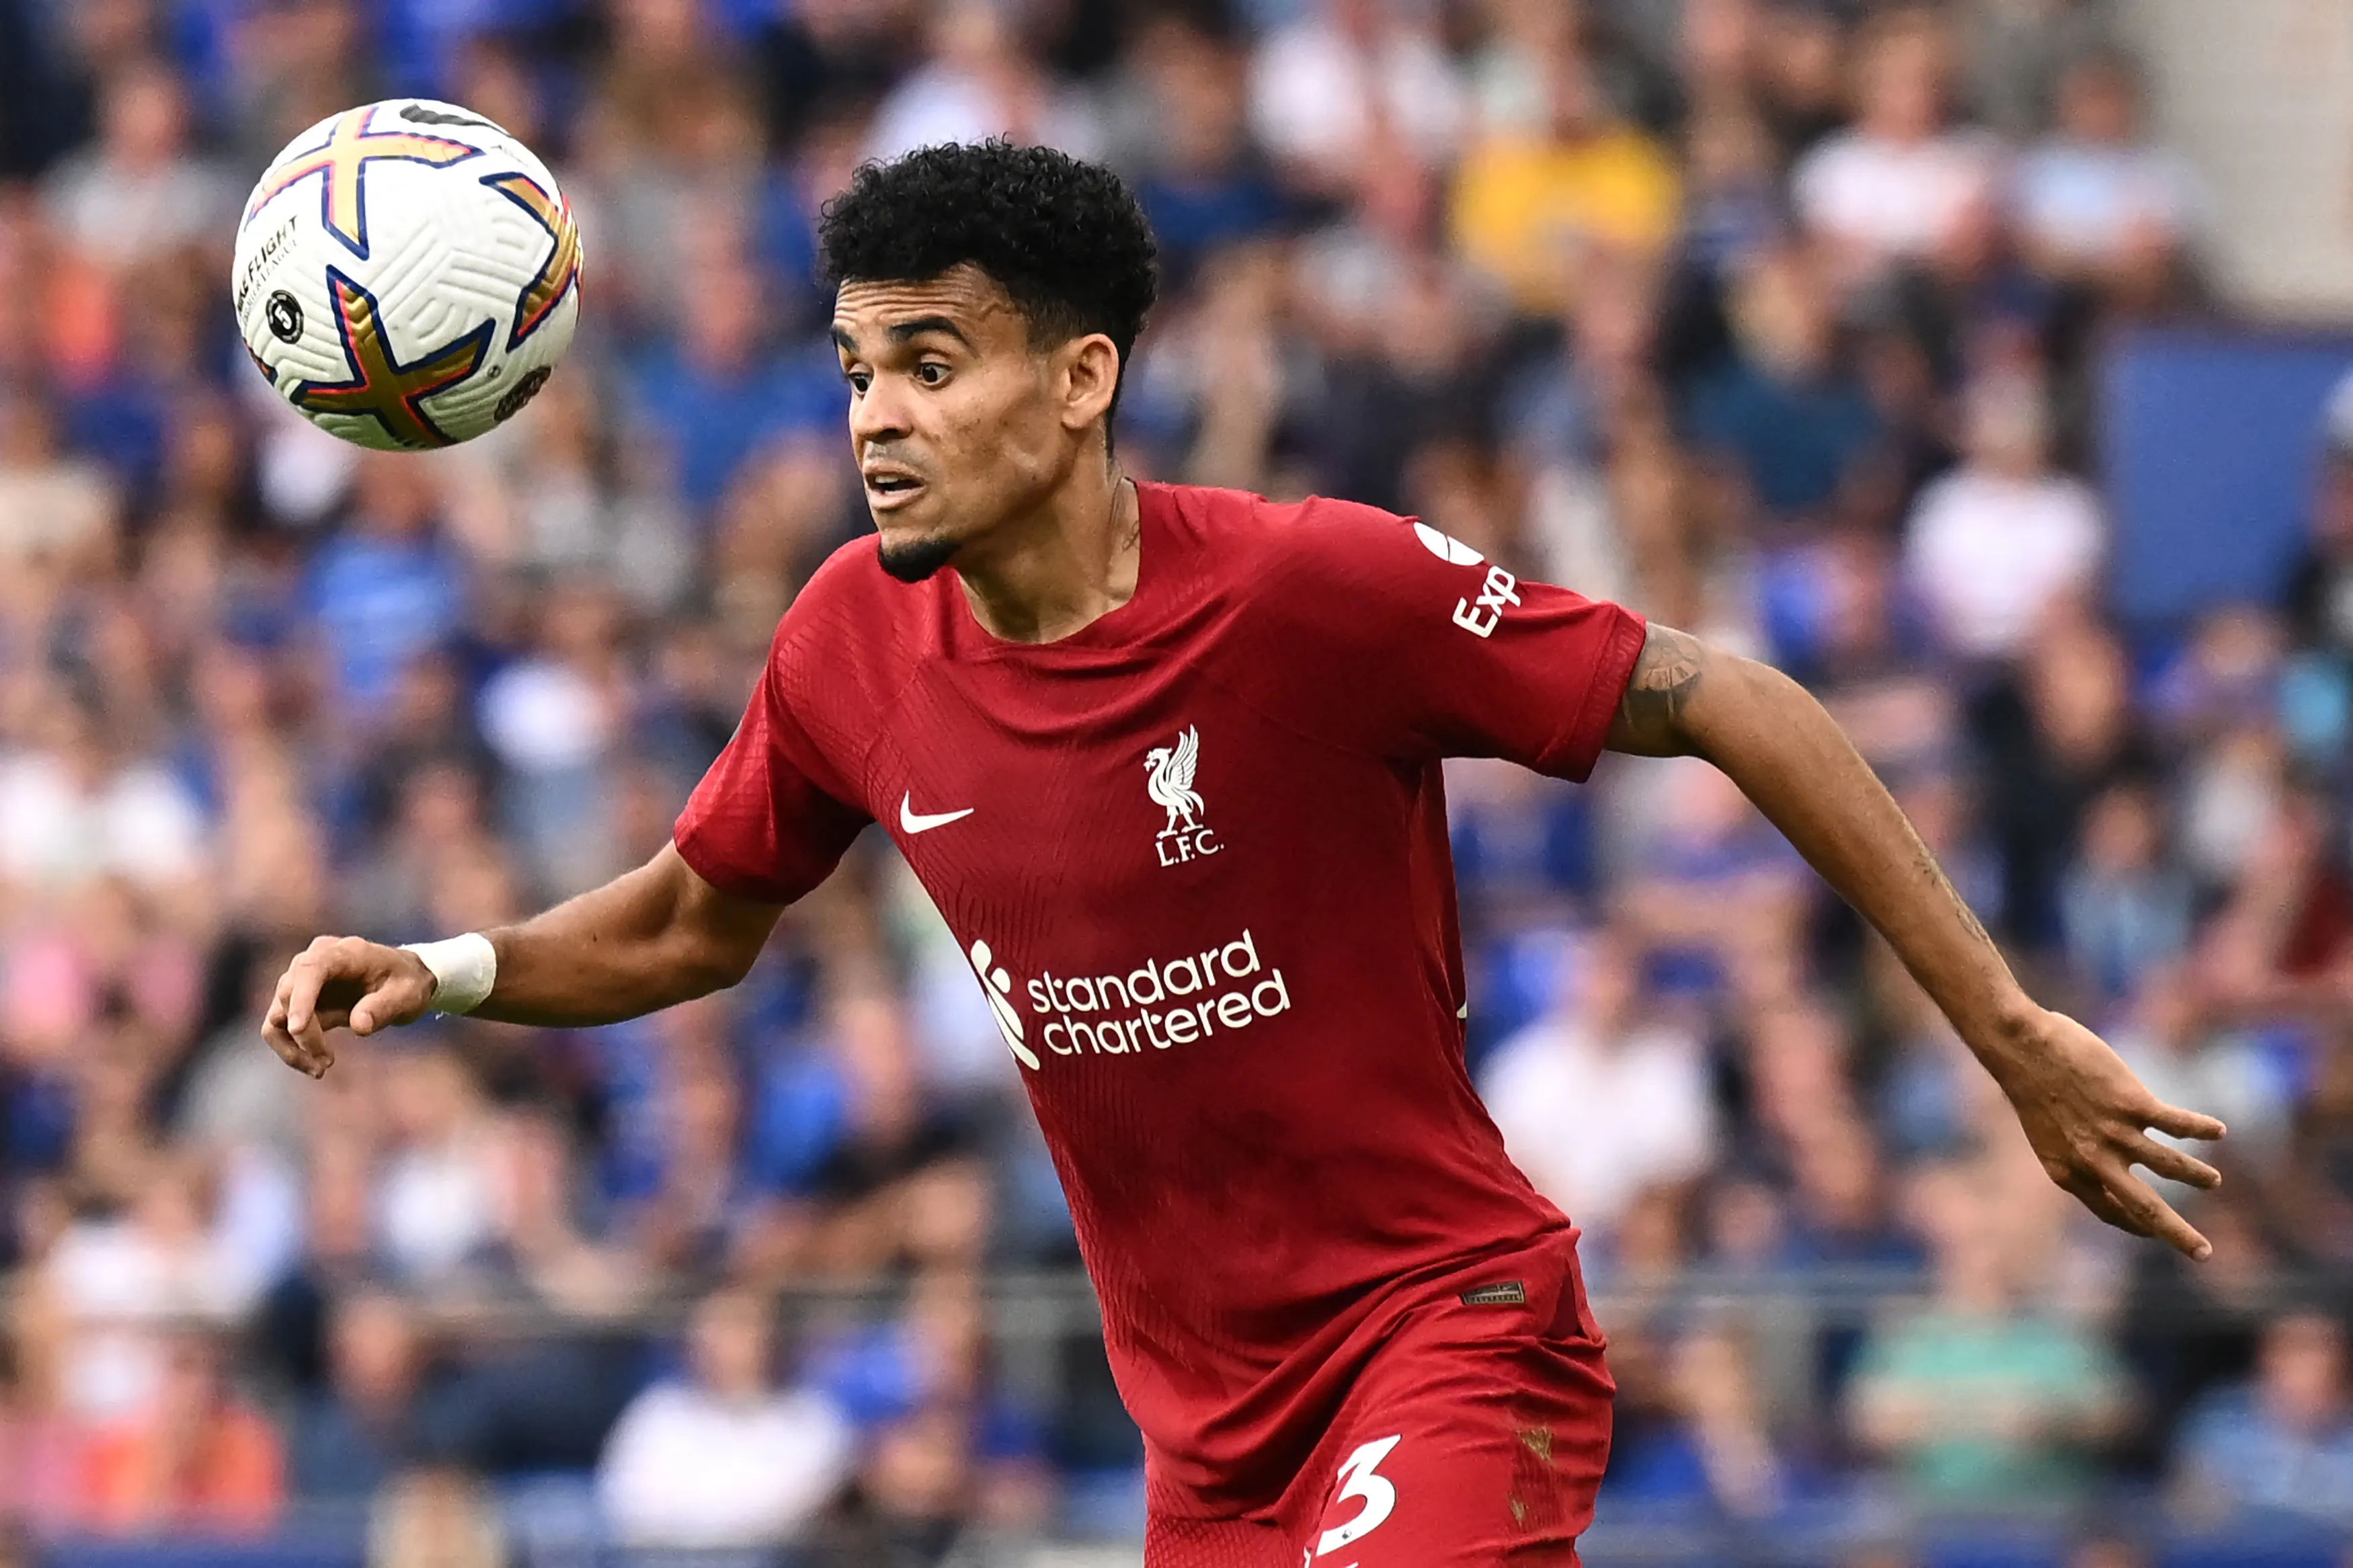 Liverpool's Colombian midfielder Luis Diaz controls the ball during the English Premier League football match between Everton and Liverpool at Goodison Park in Liverpool, northwest England on Sept. 3, 2022.?w=200&h=150